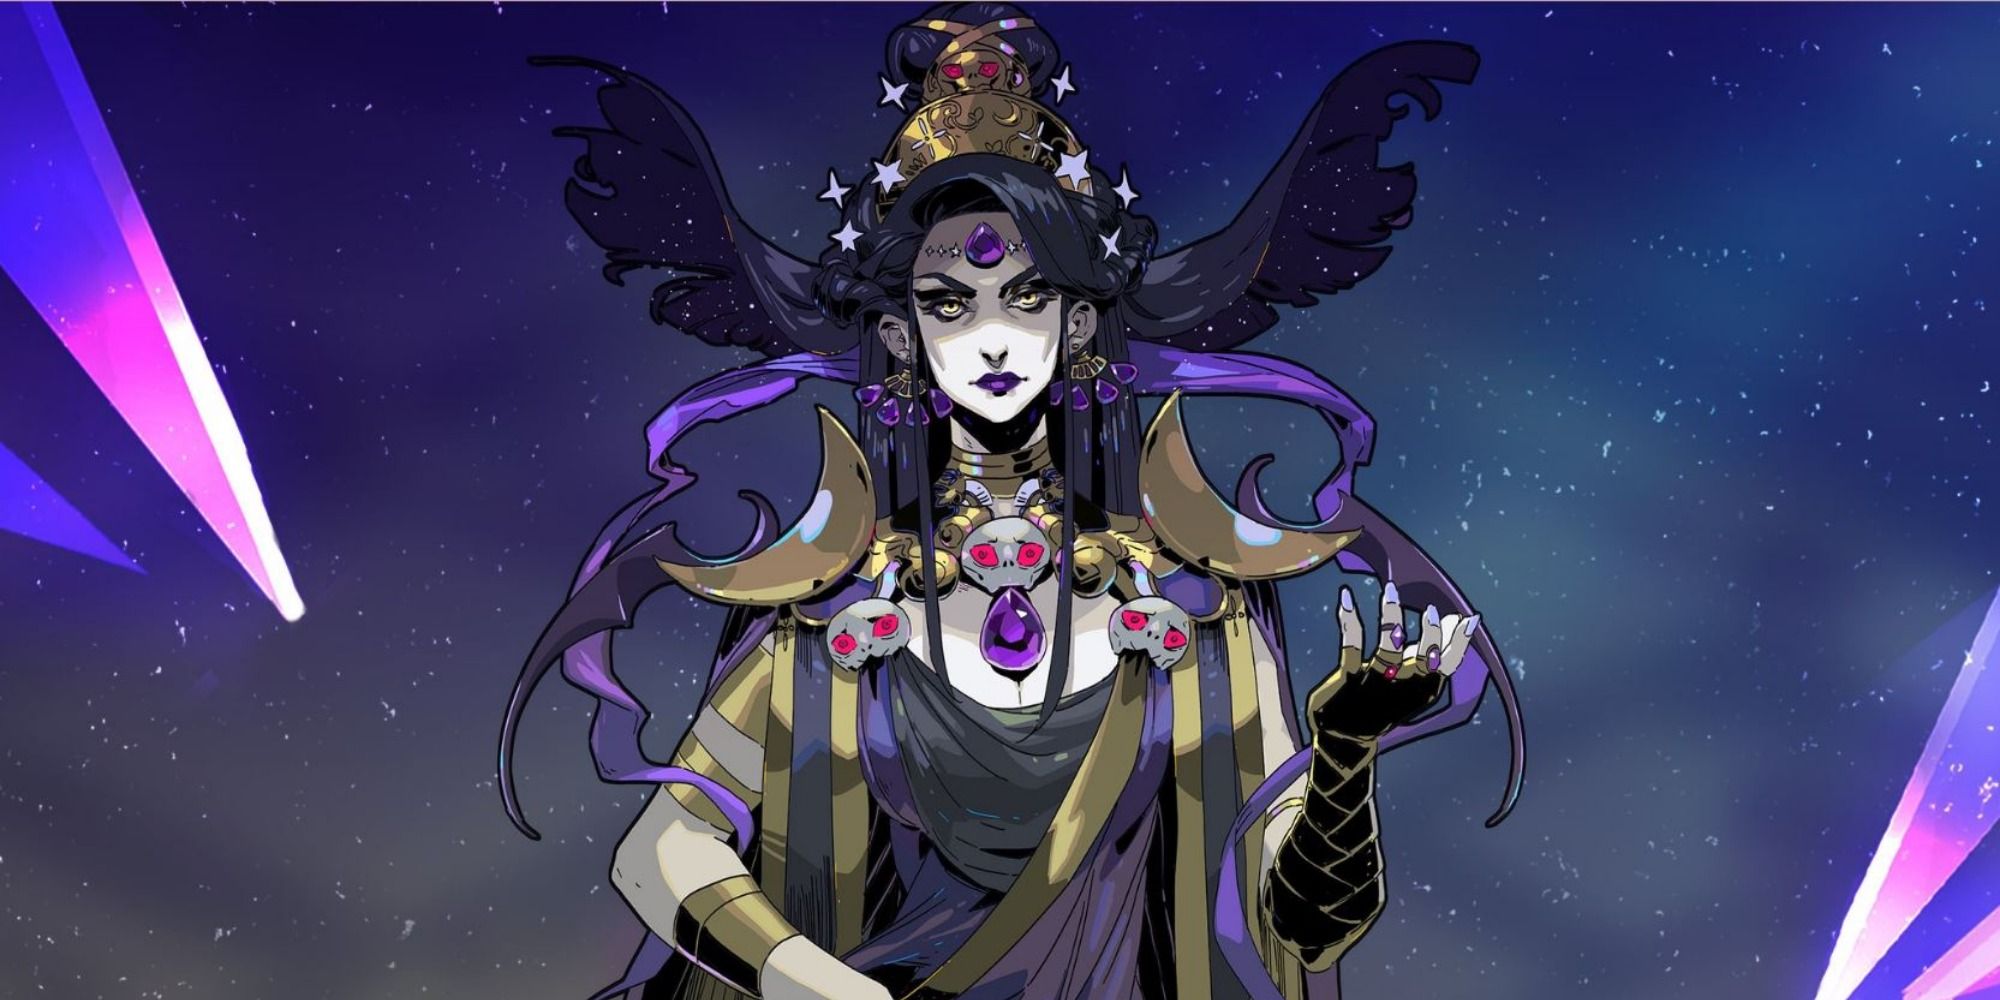 Nyx sits on a background of night sky and purple rays of light